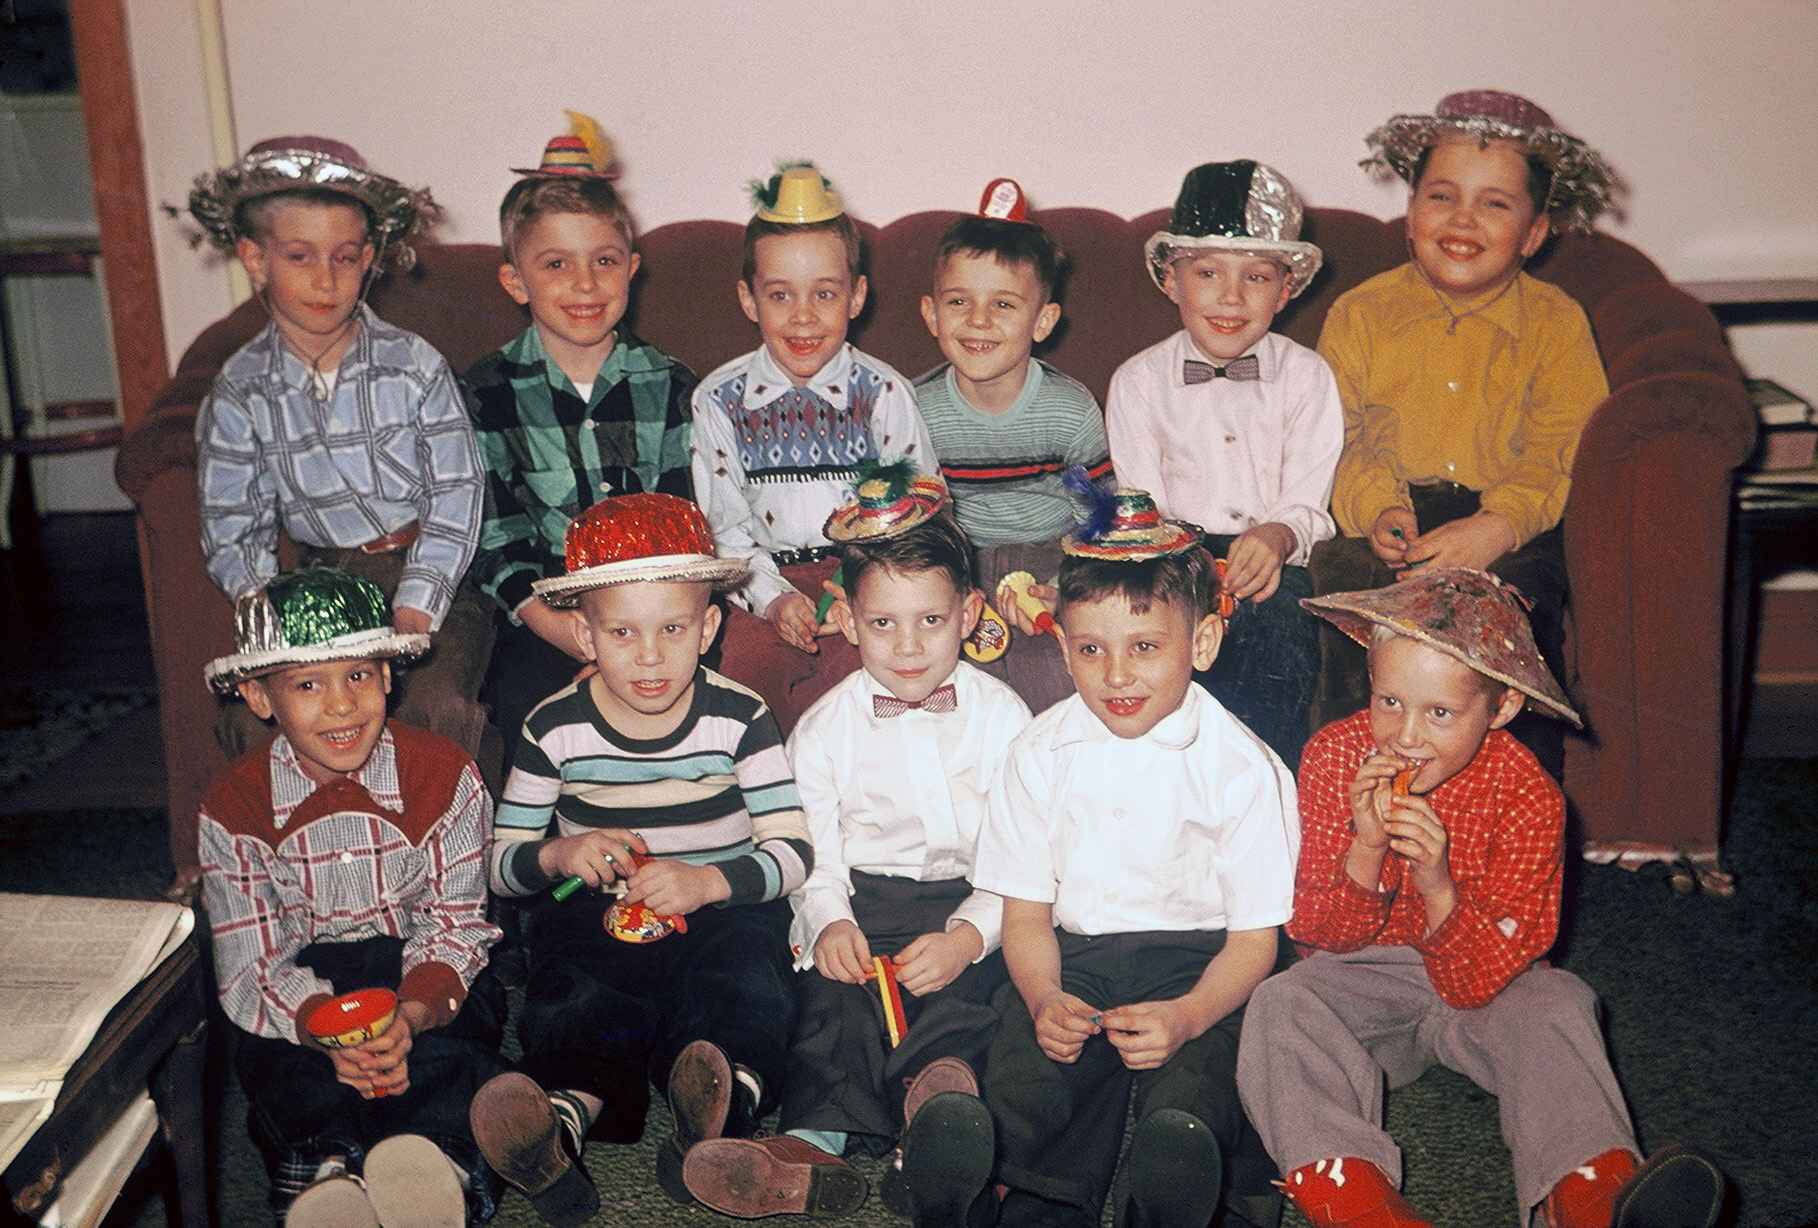 Pennsylvania circa 1956. A birthday party for my older brother, lower right in the red cowboy boots. He looks to be turning 6 or 7, which would make this near the end of January 1956 or 1957. My mother served spaghetti because it was his favorite meal. Today she'll tell you that she must have been out of her mind to serve spaghetti to all those boys. There were no expensive "thanks for coming" goody-bags like kids get today. They were given a couple of noisemakers (which, knowing my mother, were left over from New Year's) and sent home to drive their parents crazy! View full size.